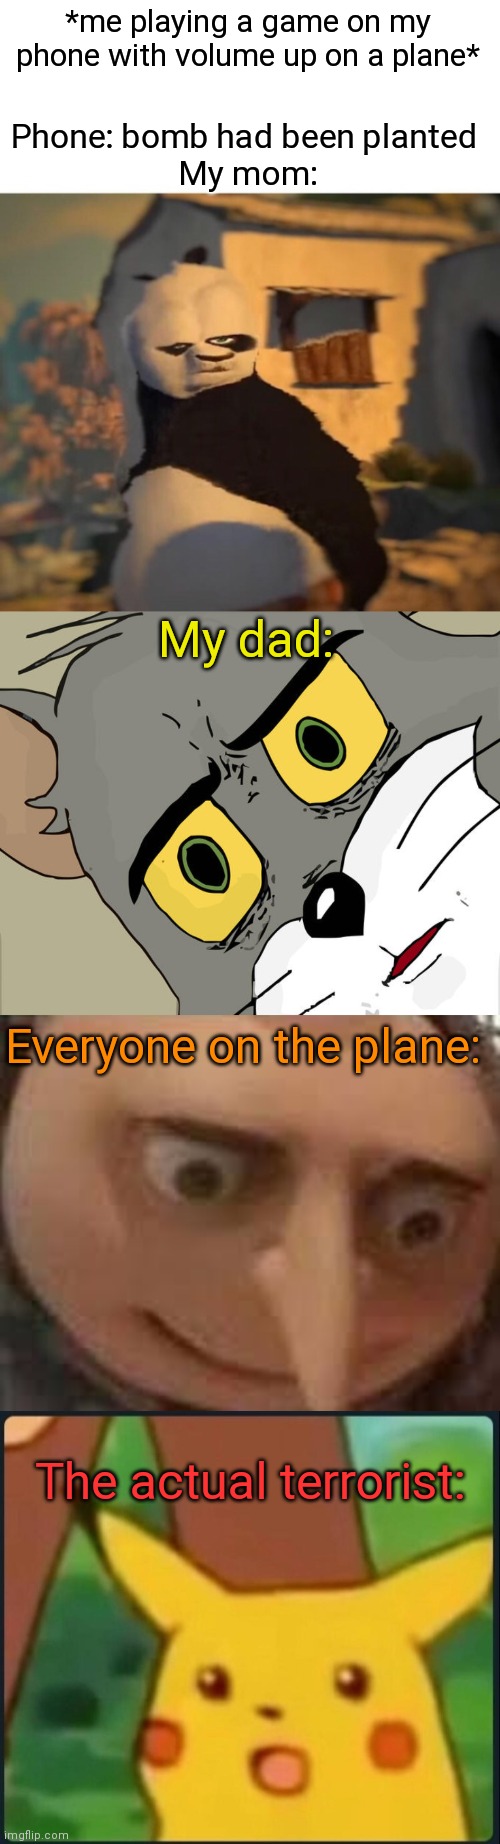 Bomb has been planted | Phone: bomb had been planted 
My mom:; *me playing a game on my phone with volume up on a plane*; My dad:; Everyone on the plane:; The actual terrorist: | image tagged in drunk kung fu panda,memes,unsettled tom,gru face,surprised pikachu,bomb | made w/ Imgflip meme maker